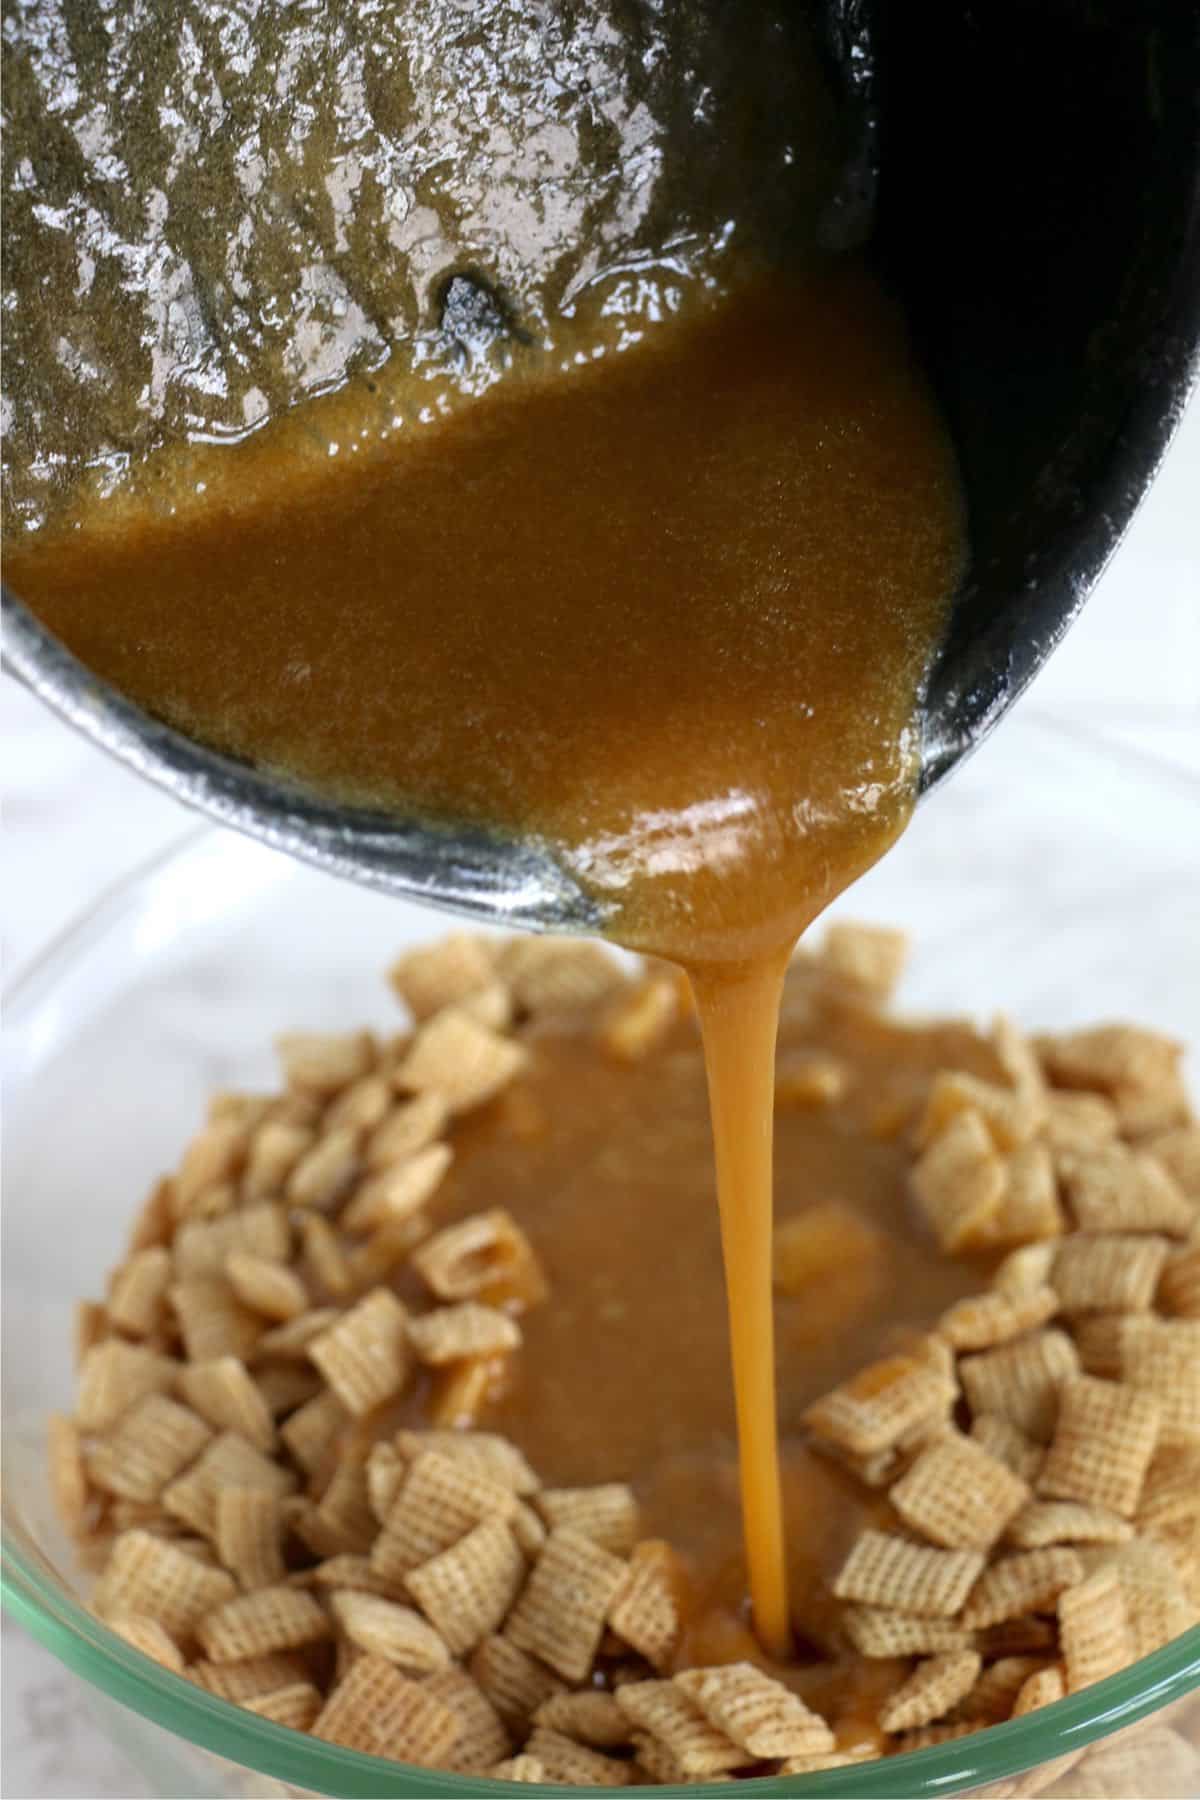 Caramel being poured over Chex cereal in a bowl